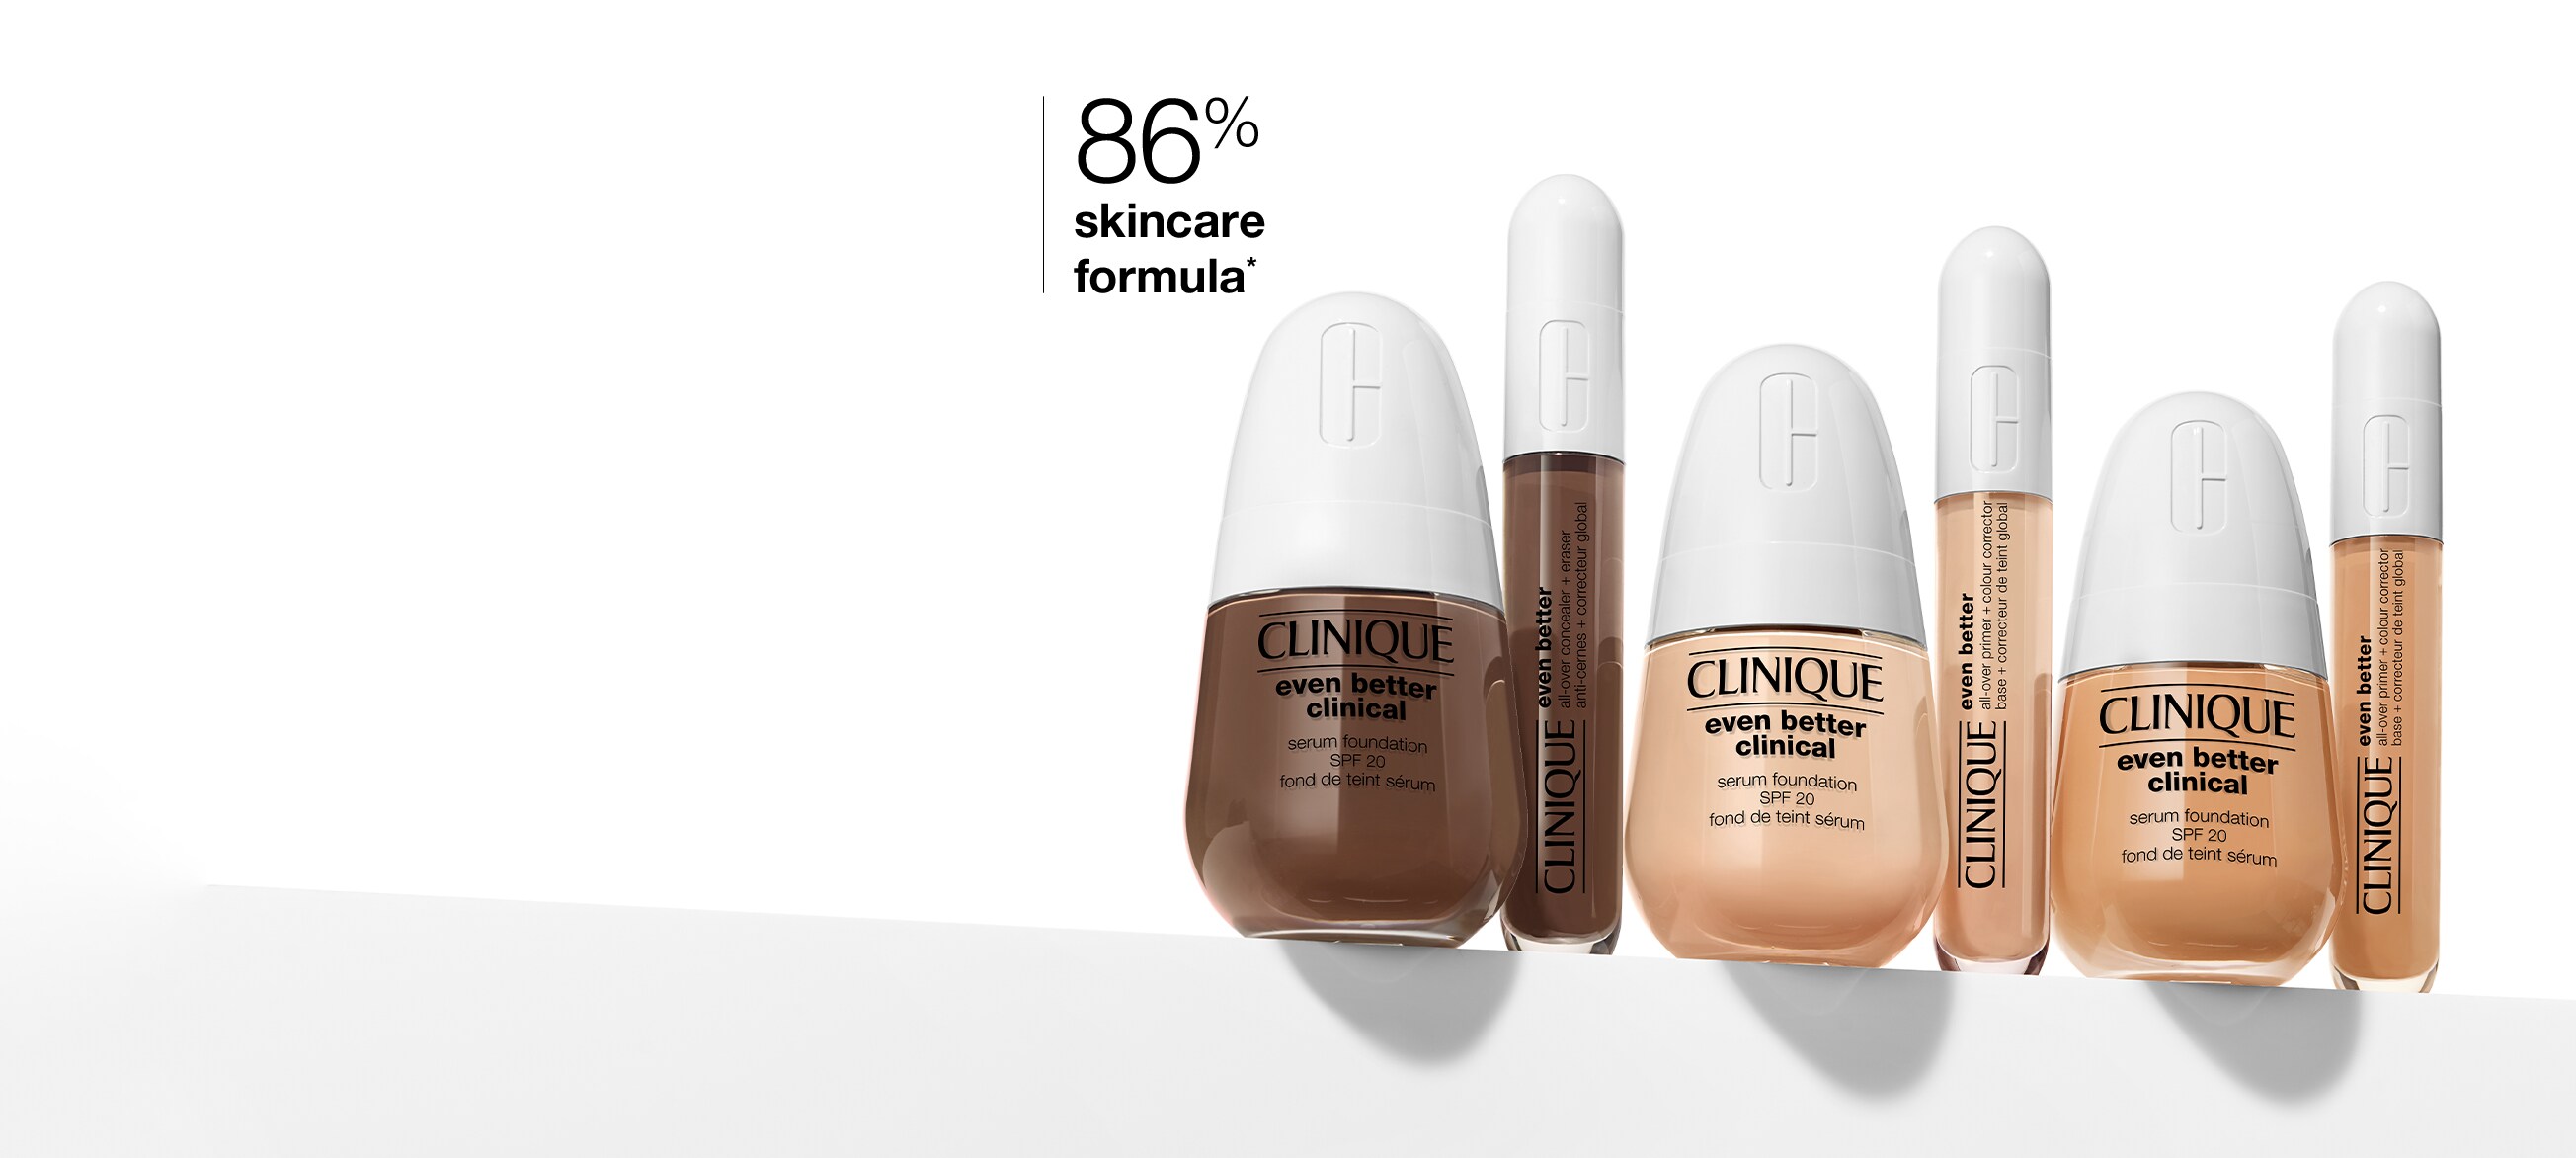 Outsmart lines and wrinkles.